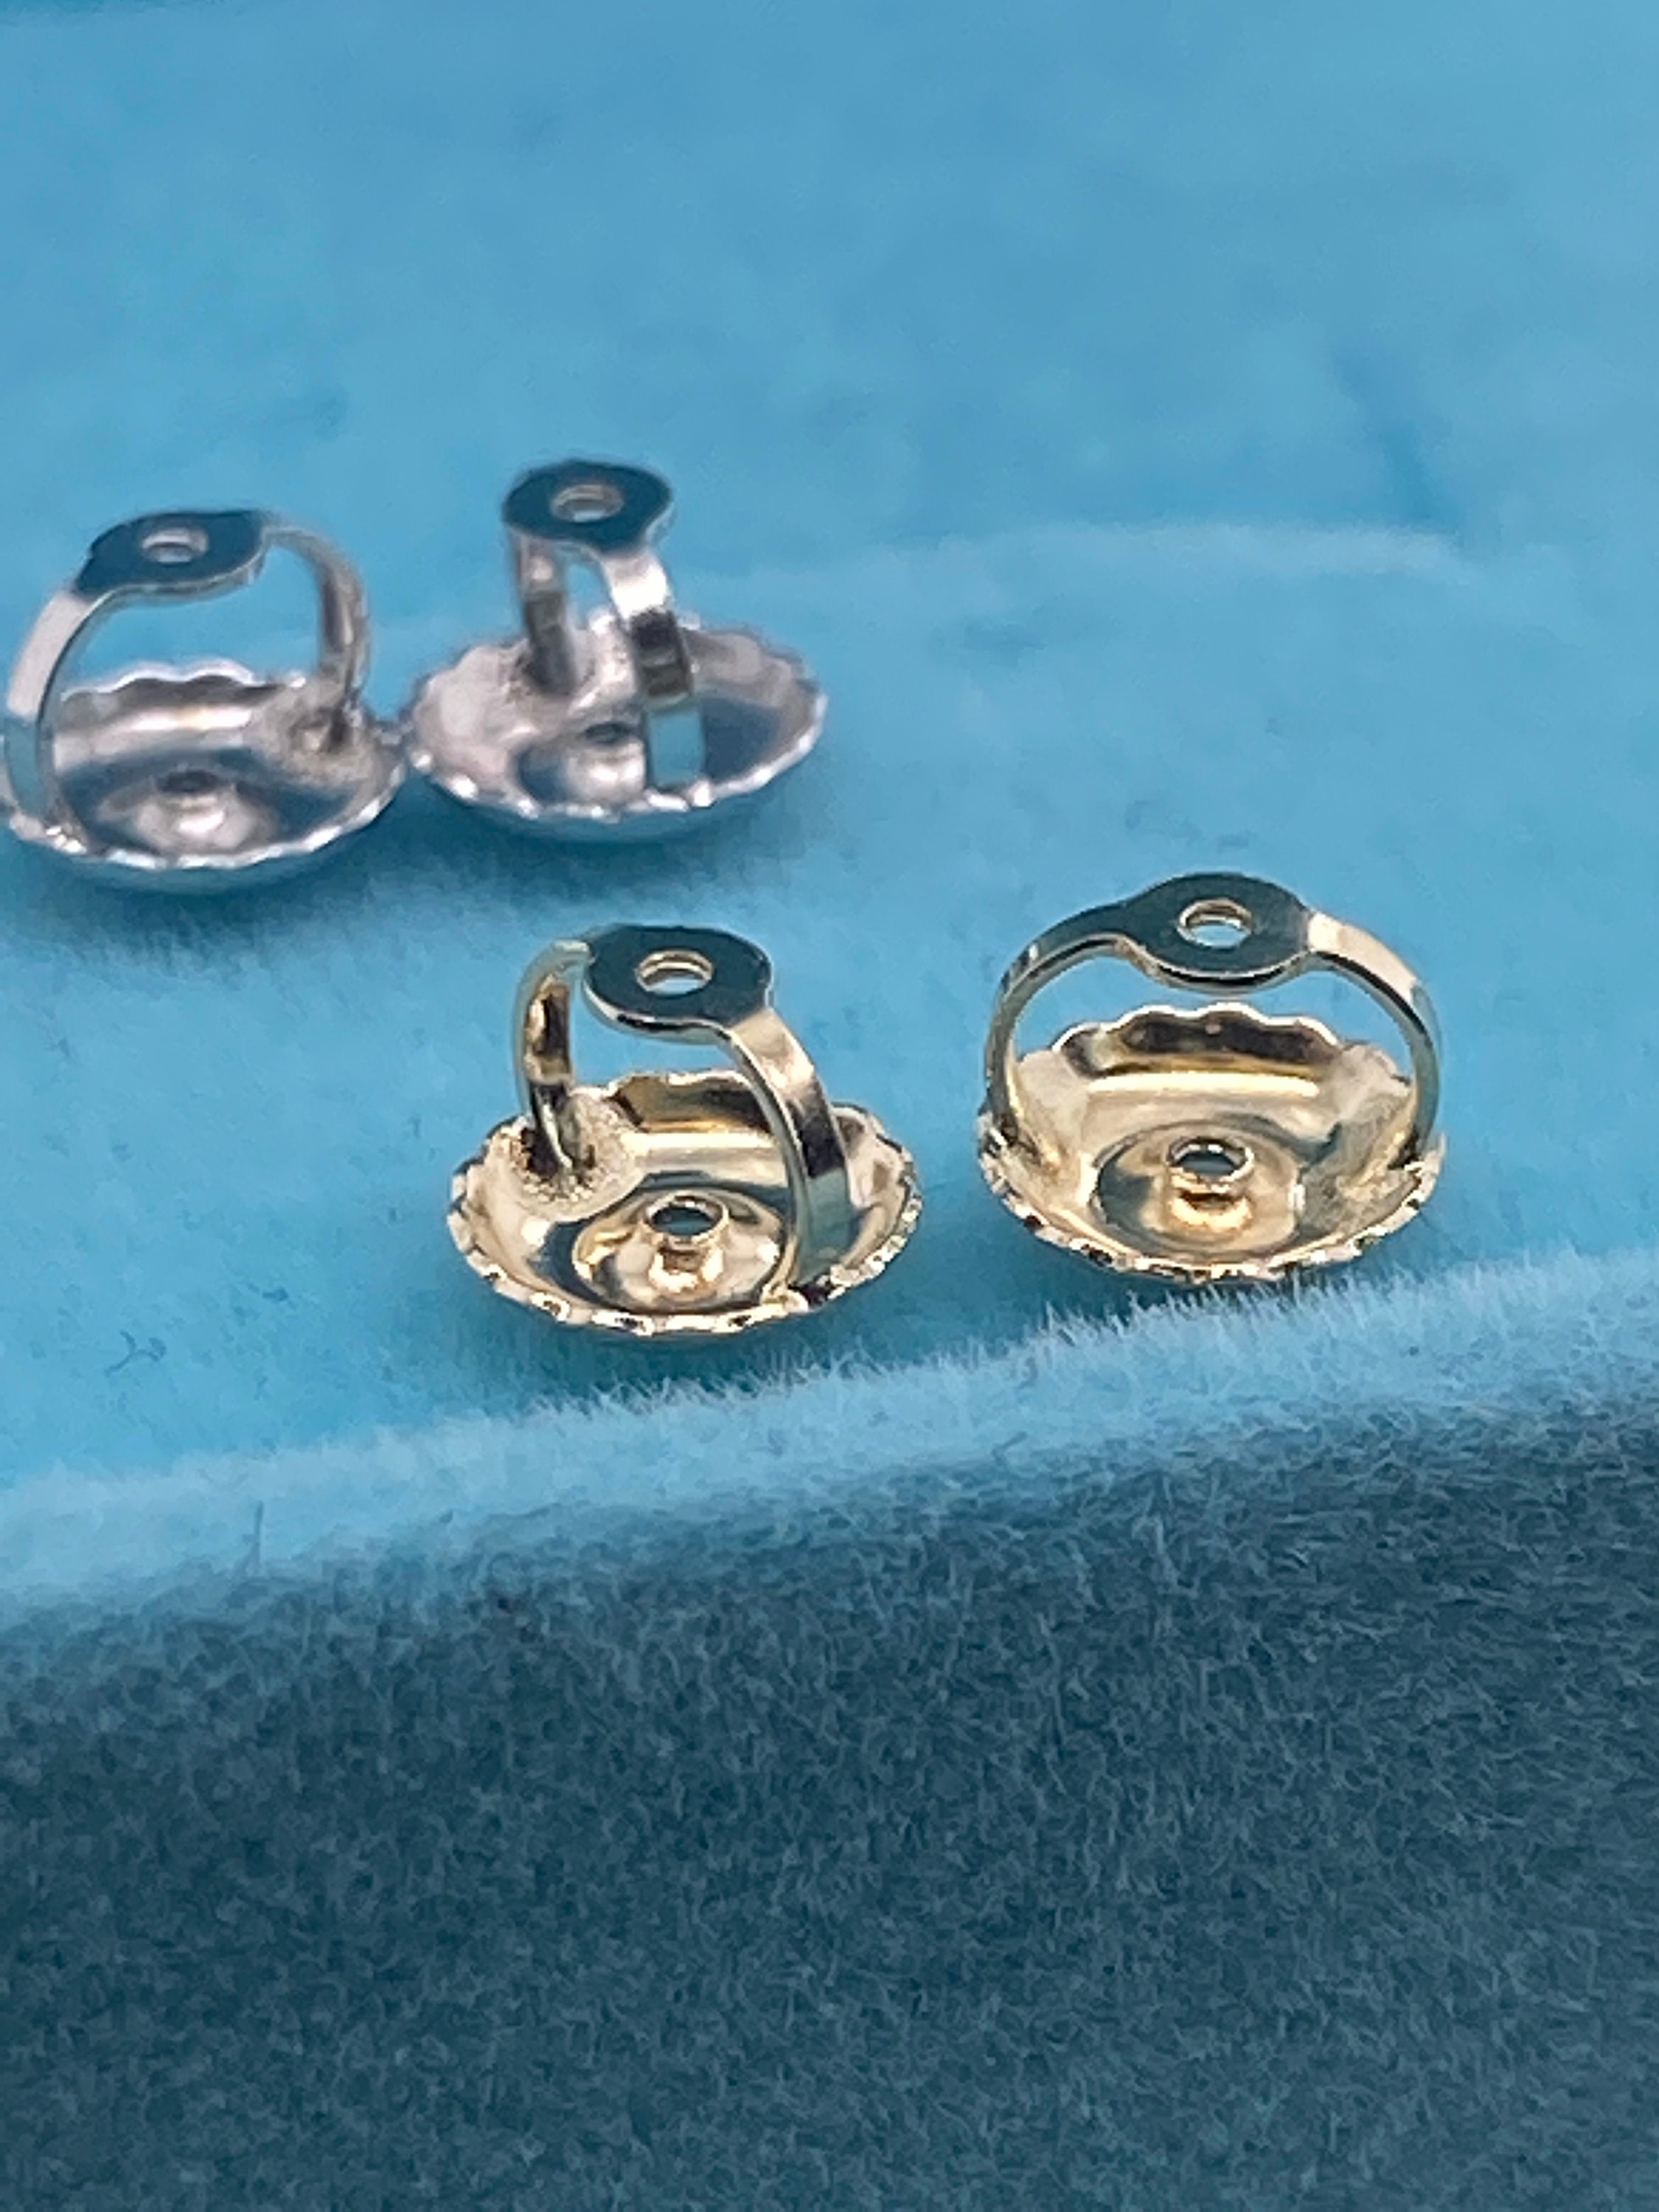 Screw Back Earring Replacement -  Singapore